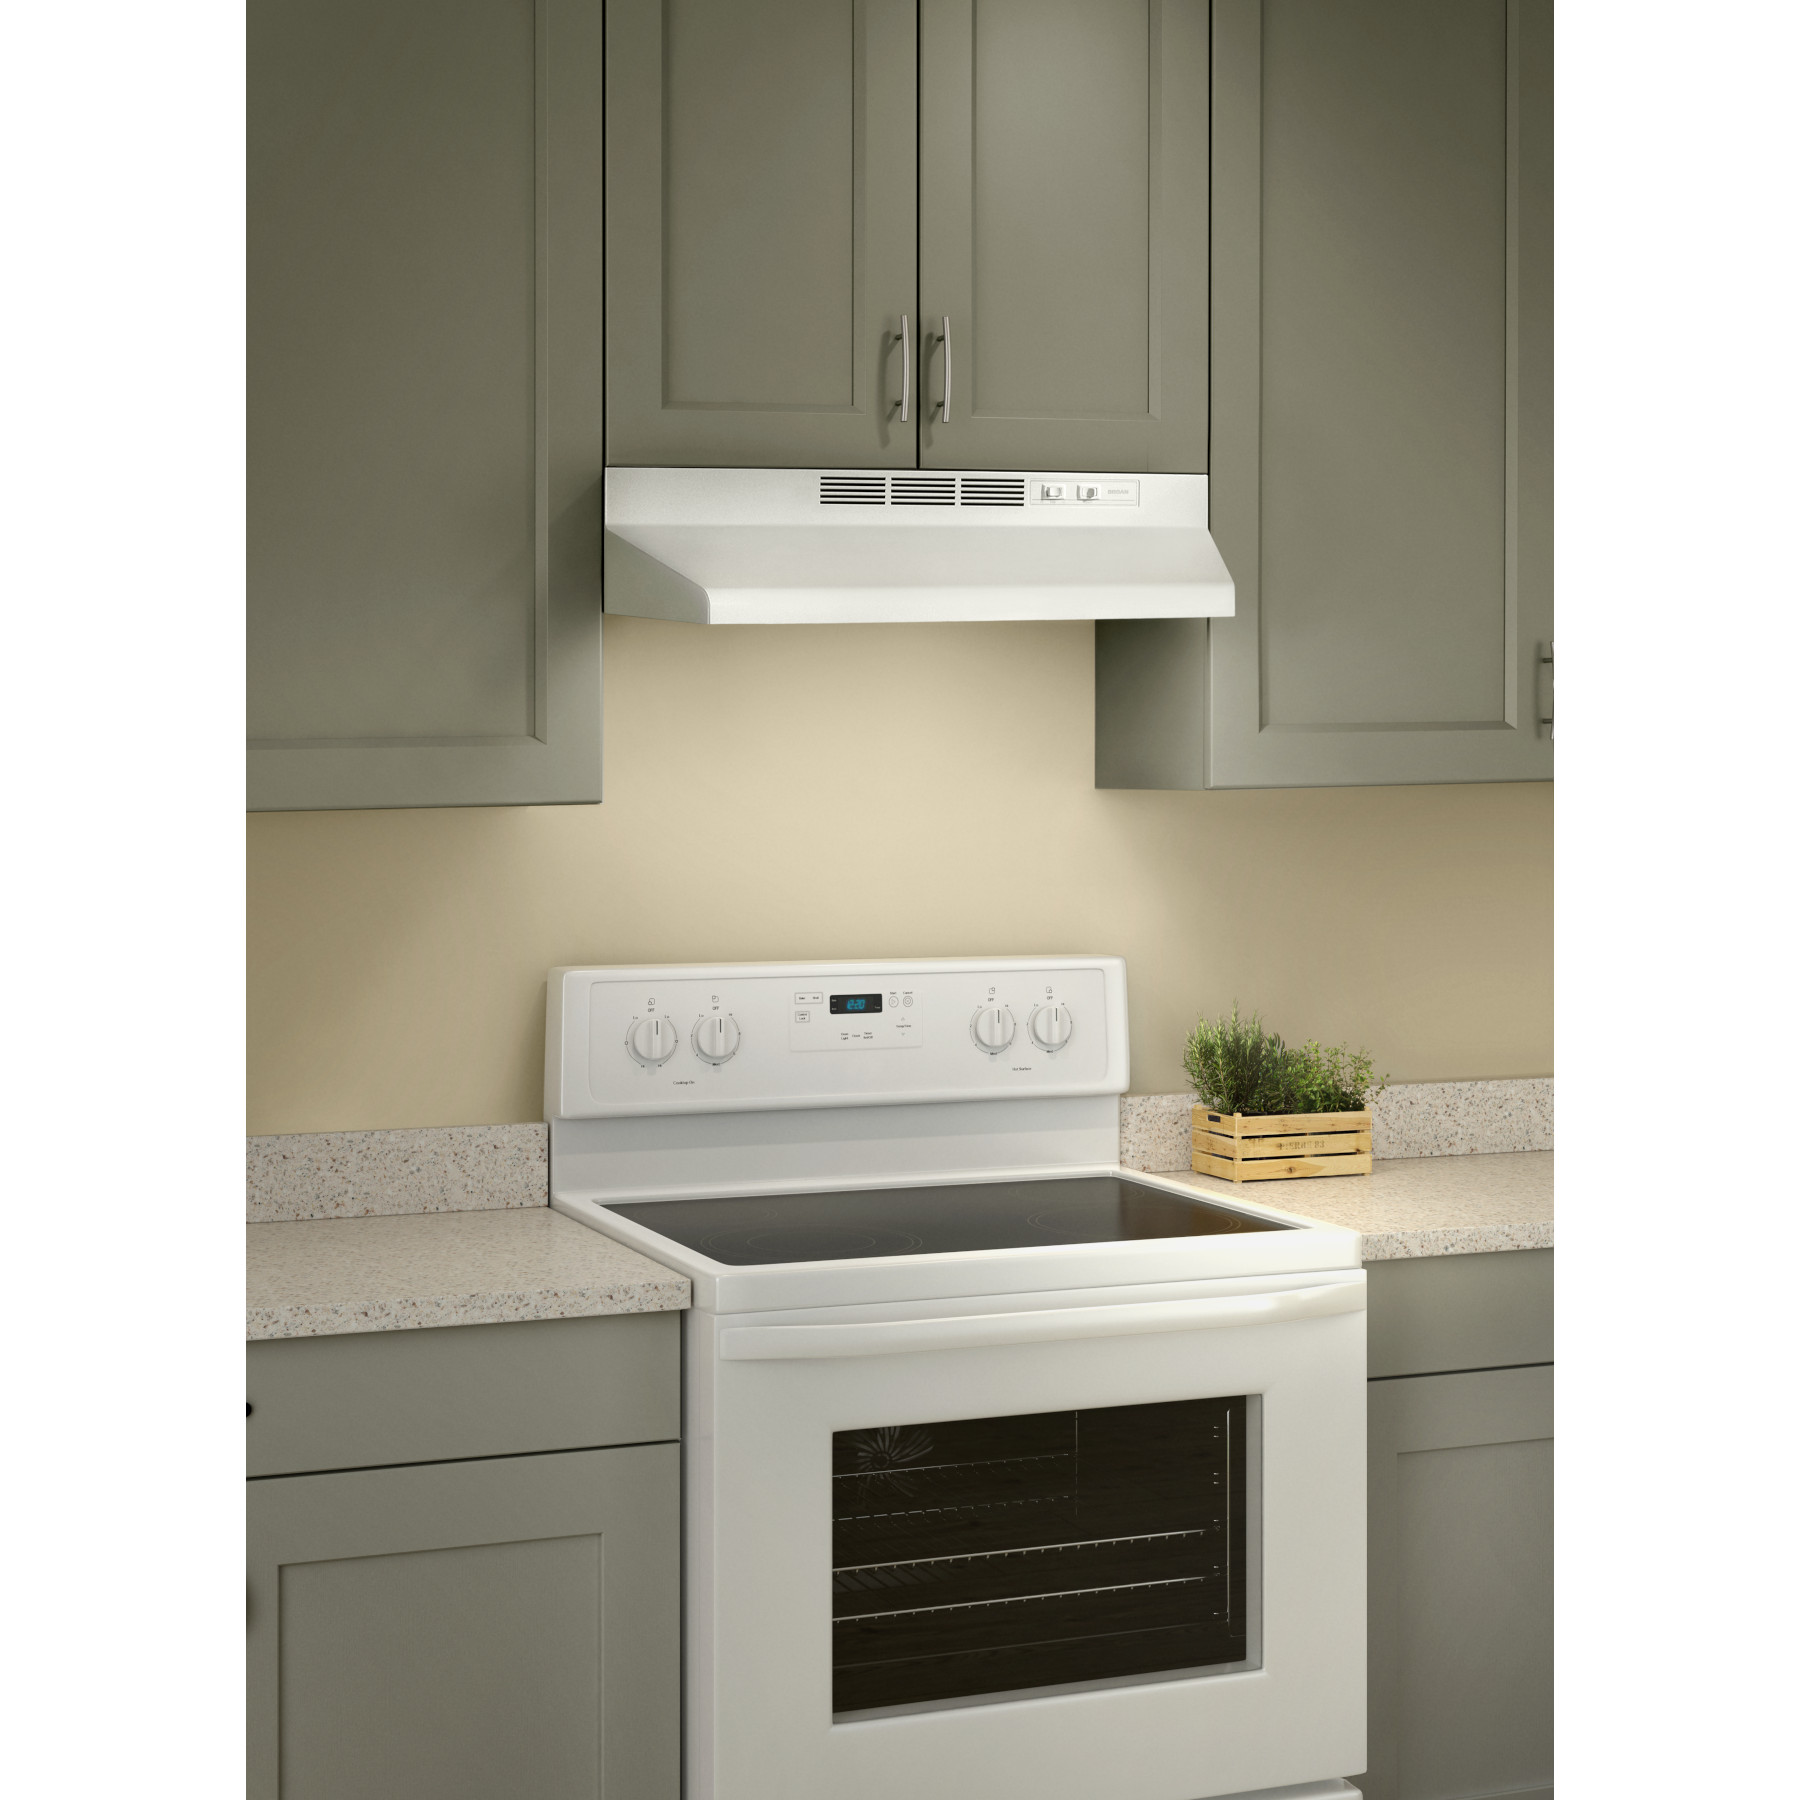 30-I... Broan-NuTone 413001 Non-Ducted Under-Cabinet Ductless Range Hood Insert 